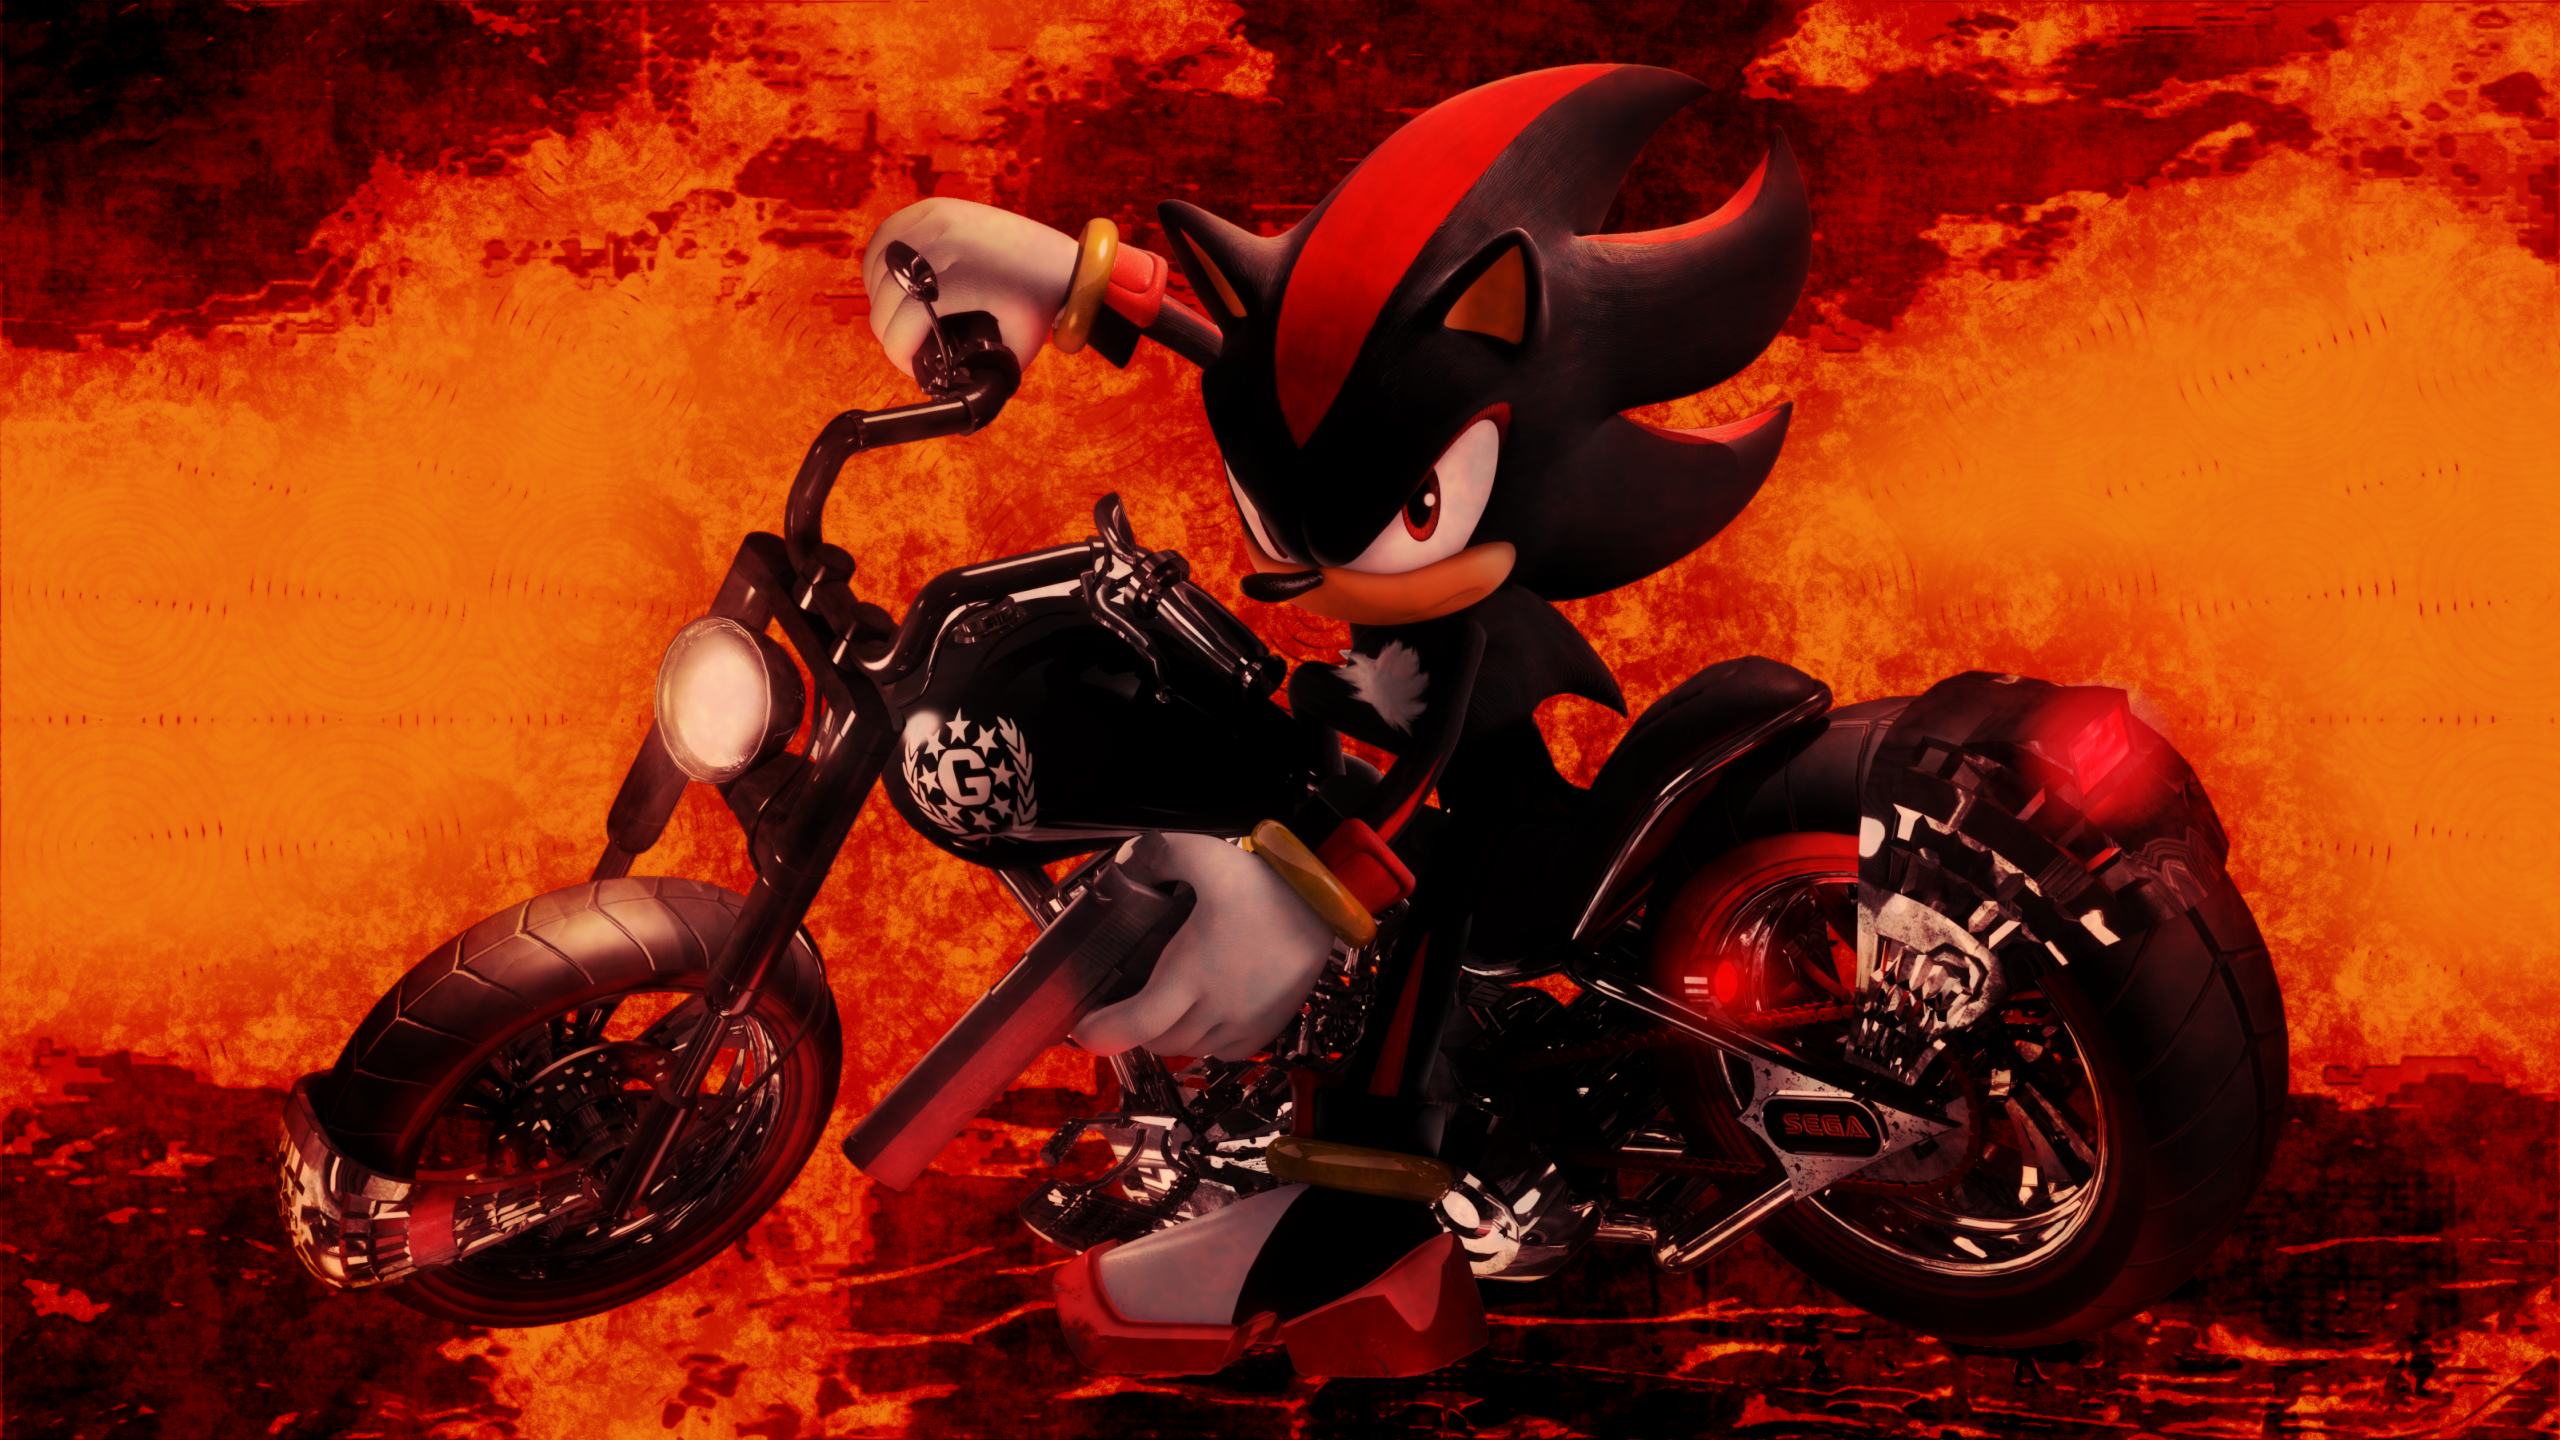 Shadow the Hedgehog on fire by Light-Rock